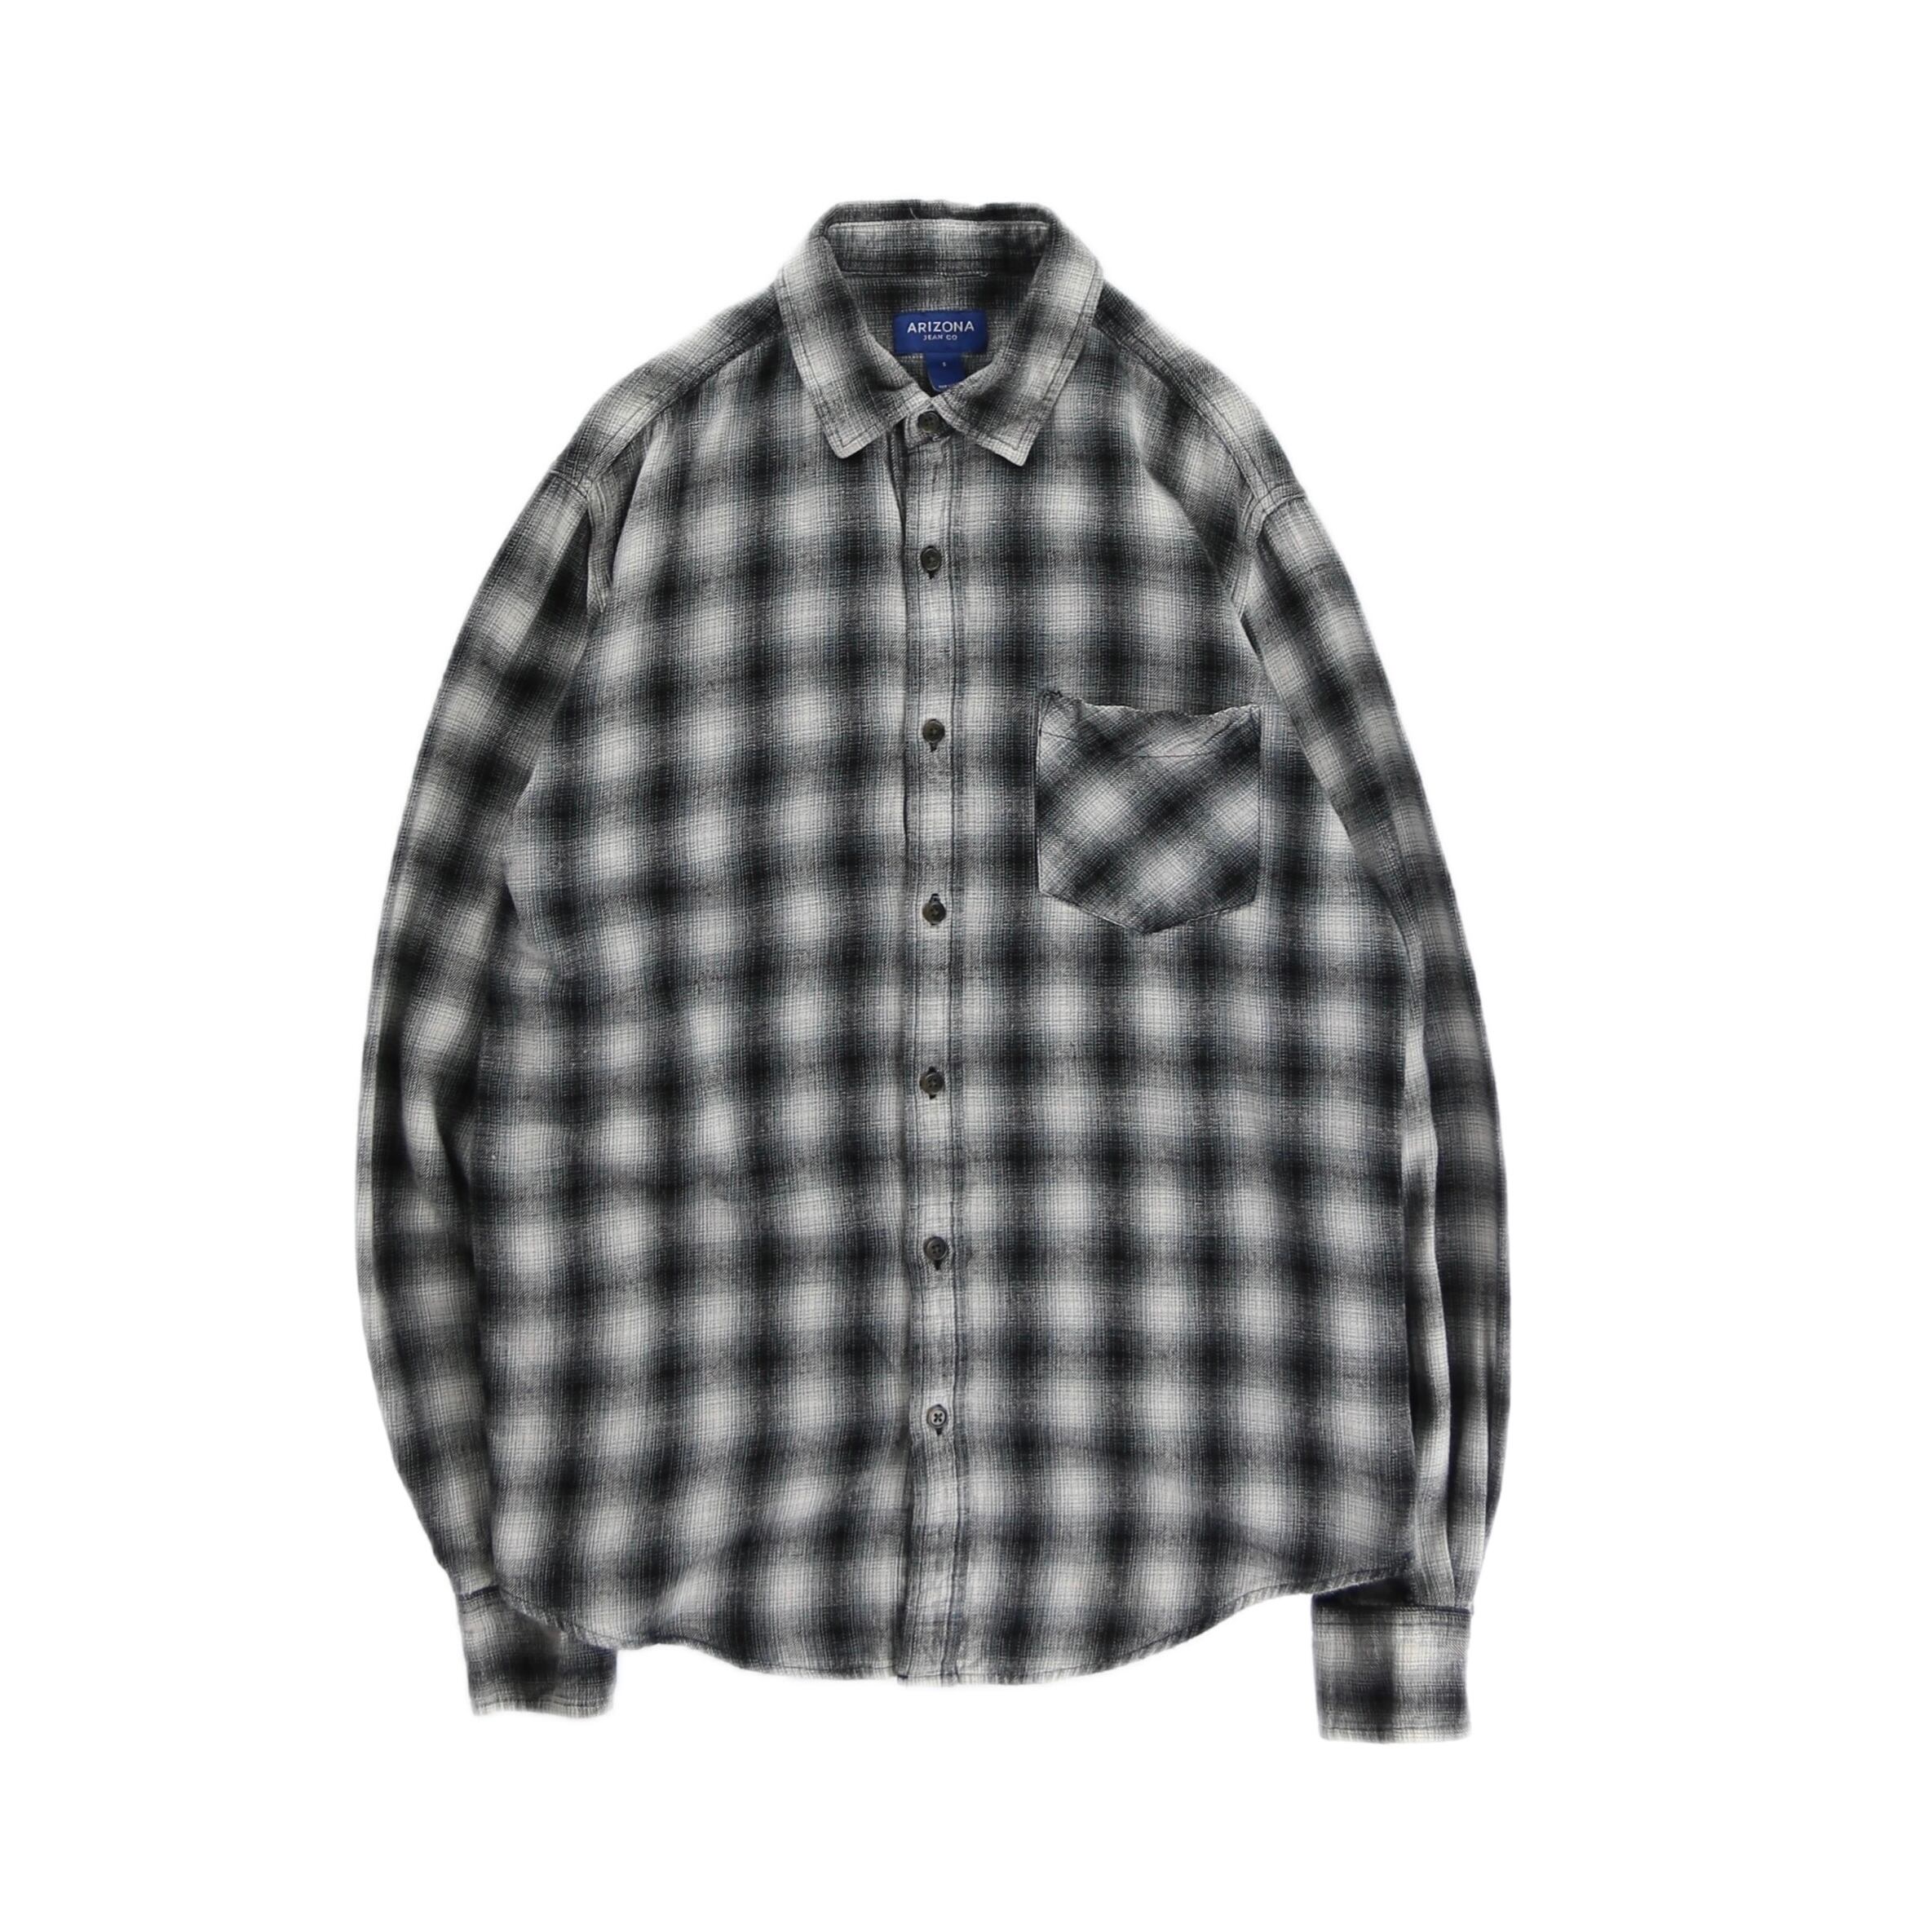 90s vintage ombre check flannel shirt